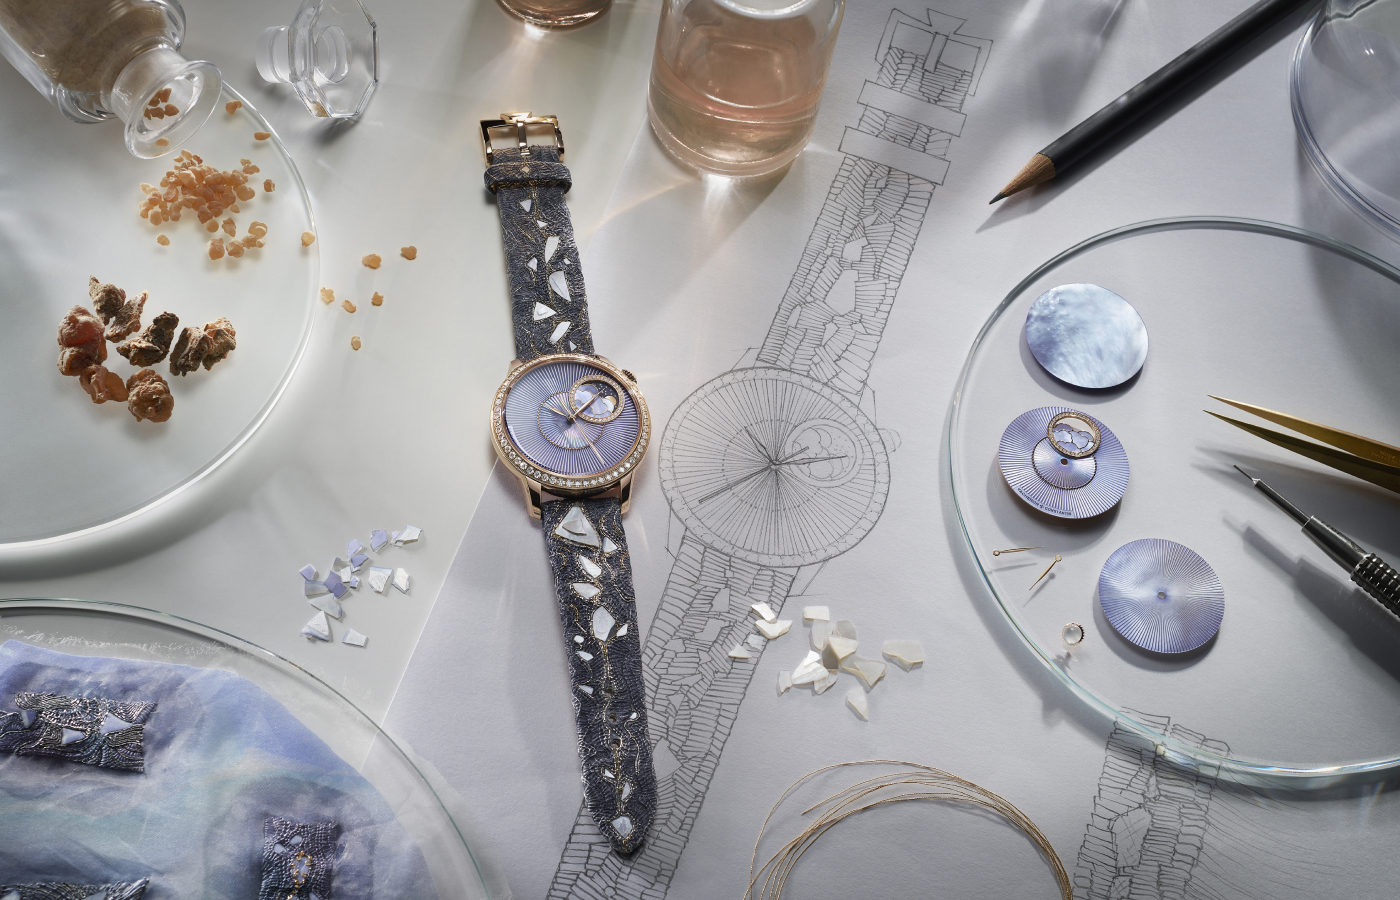 Vacheron Constantin Égérie - The Pleats of Time Moonphase x Yiqing Yin watch in pink gold, lilac mother-of-pearl and diamond on a calfskin leather strap adorned with artistic embroidery worked from silk threads, inlaid with mother-of-pearl fragments and encapsulated perfume